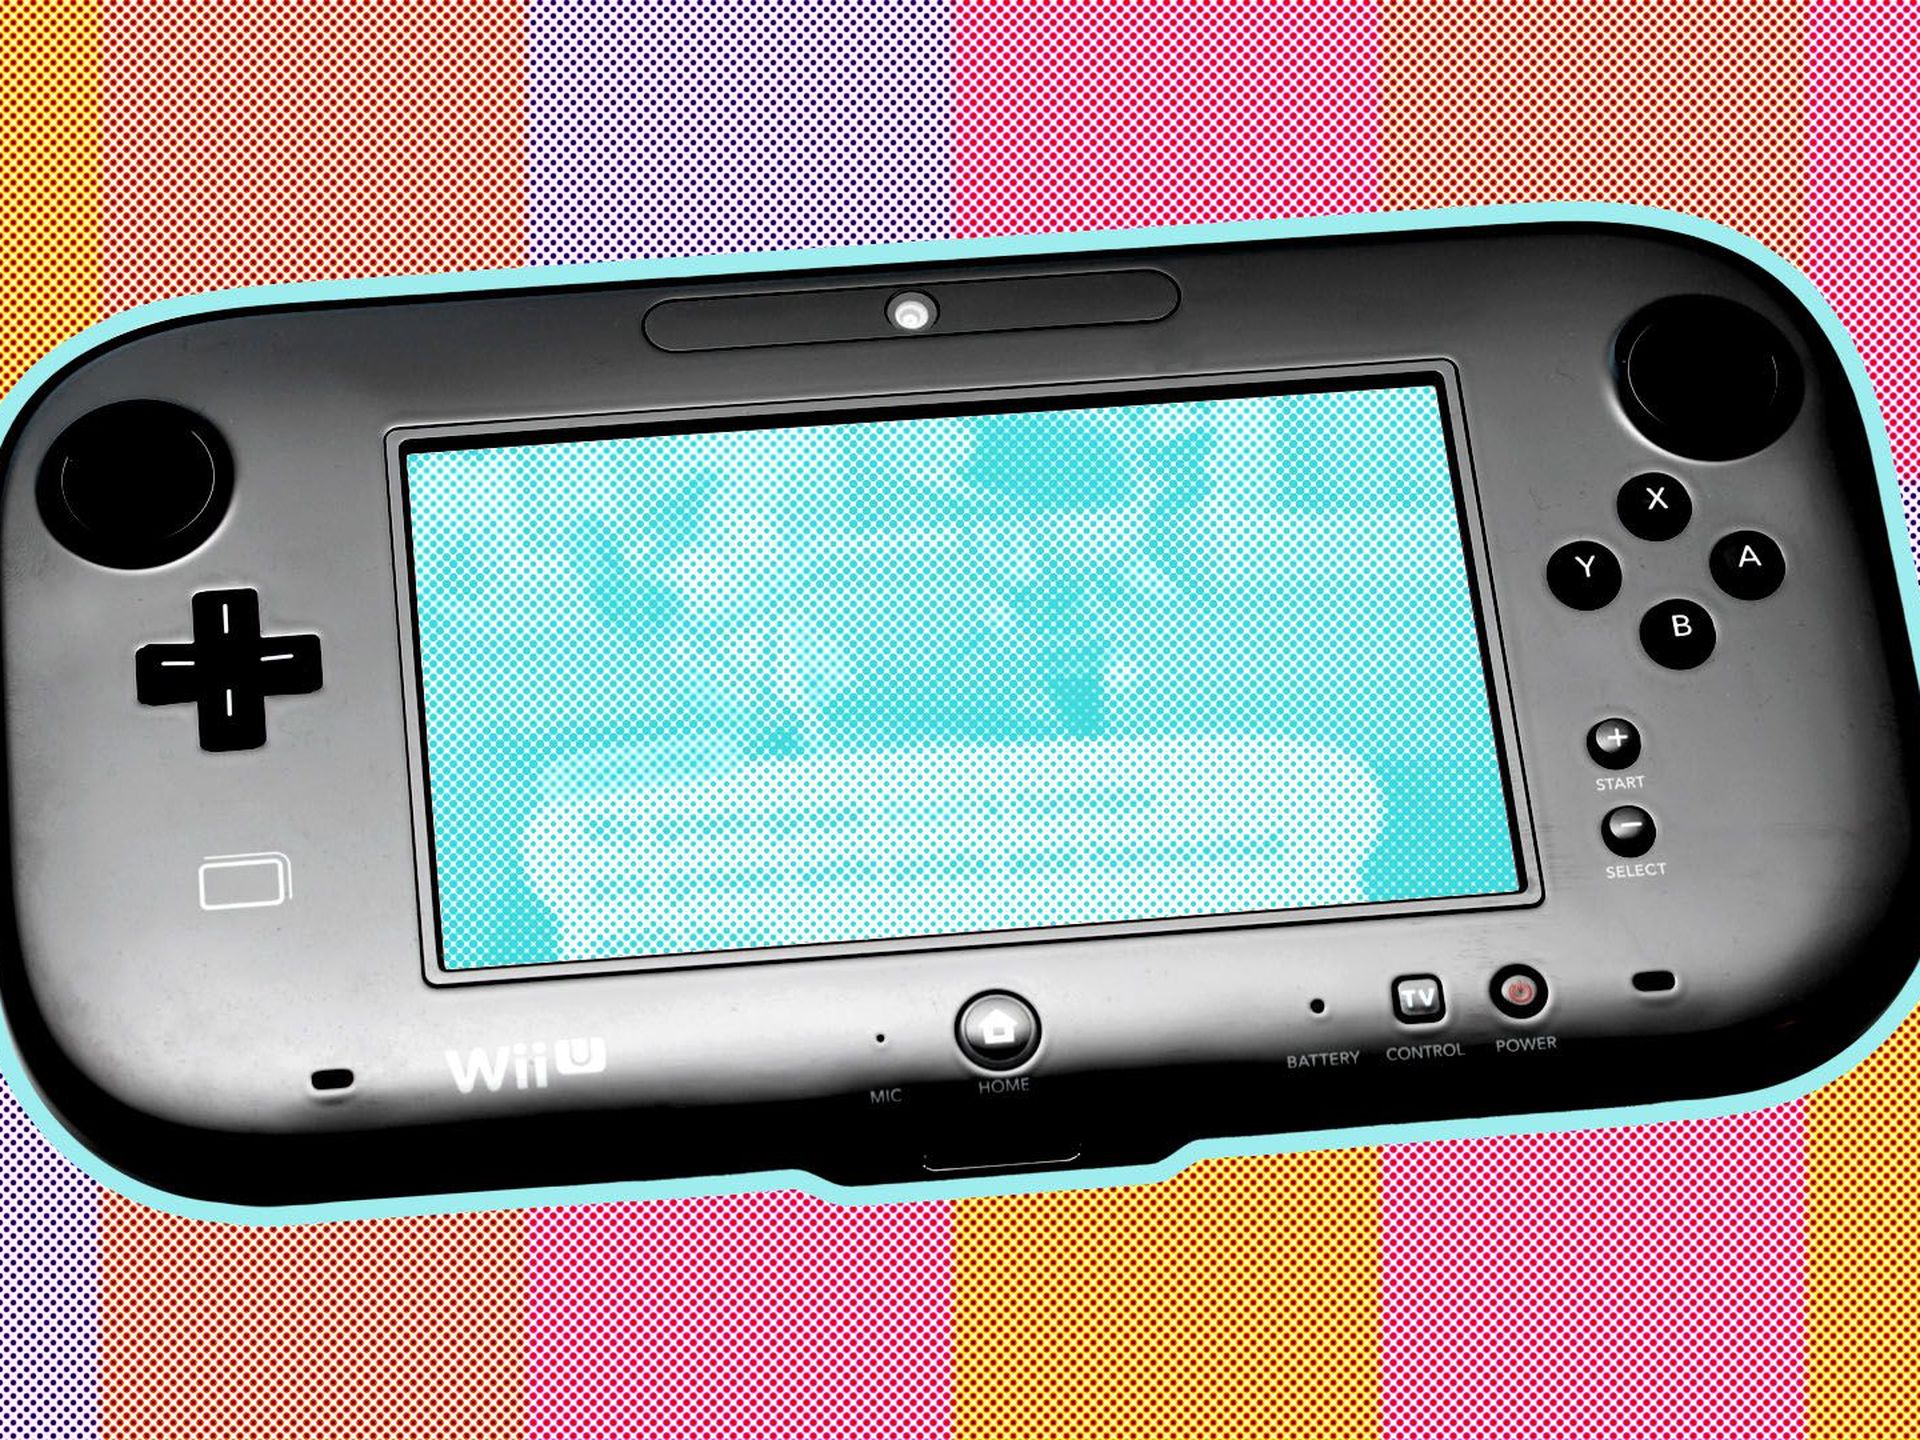 Wii U Is Nintendo's Best System for Playing Classic Games